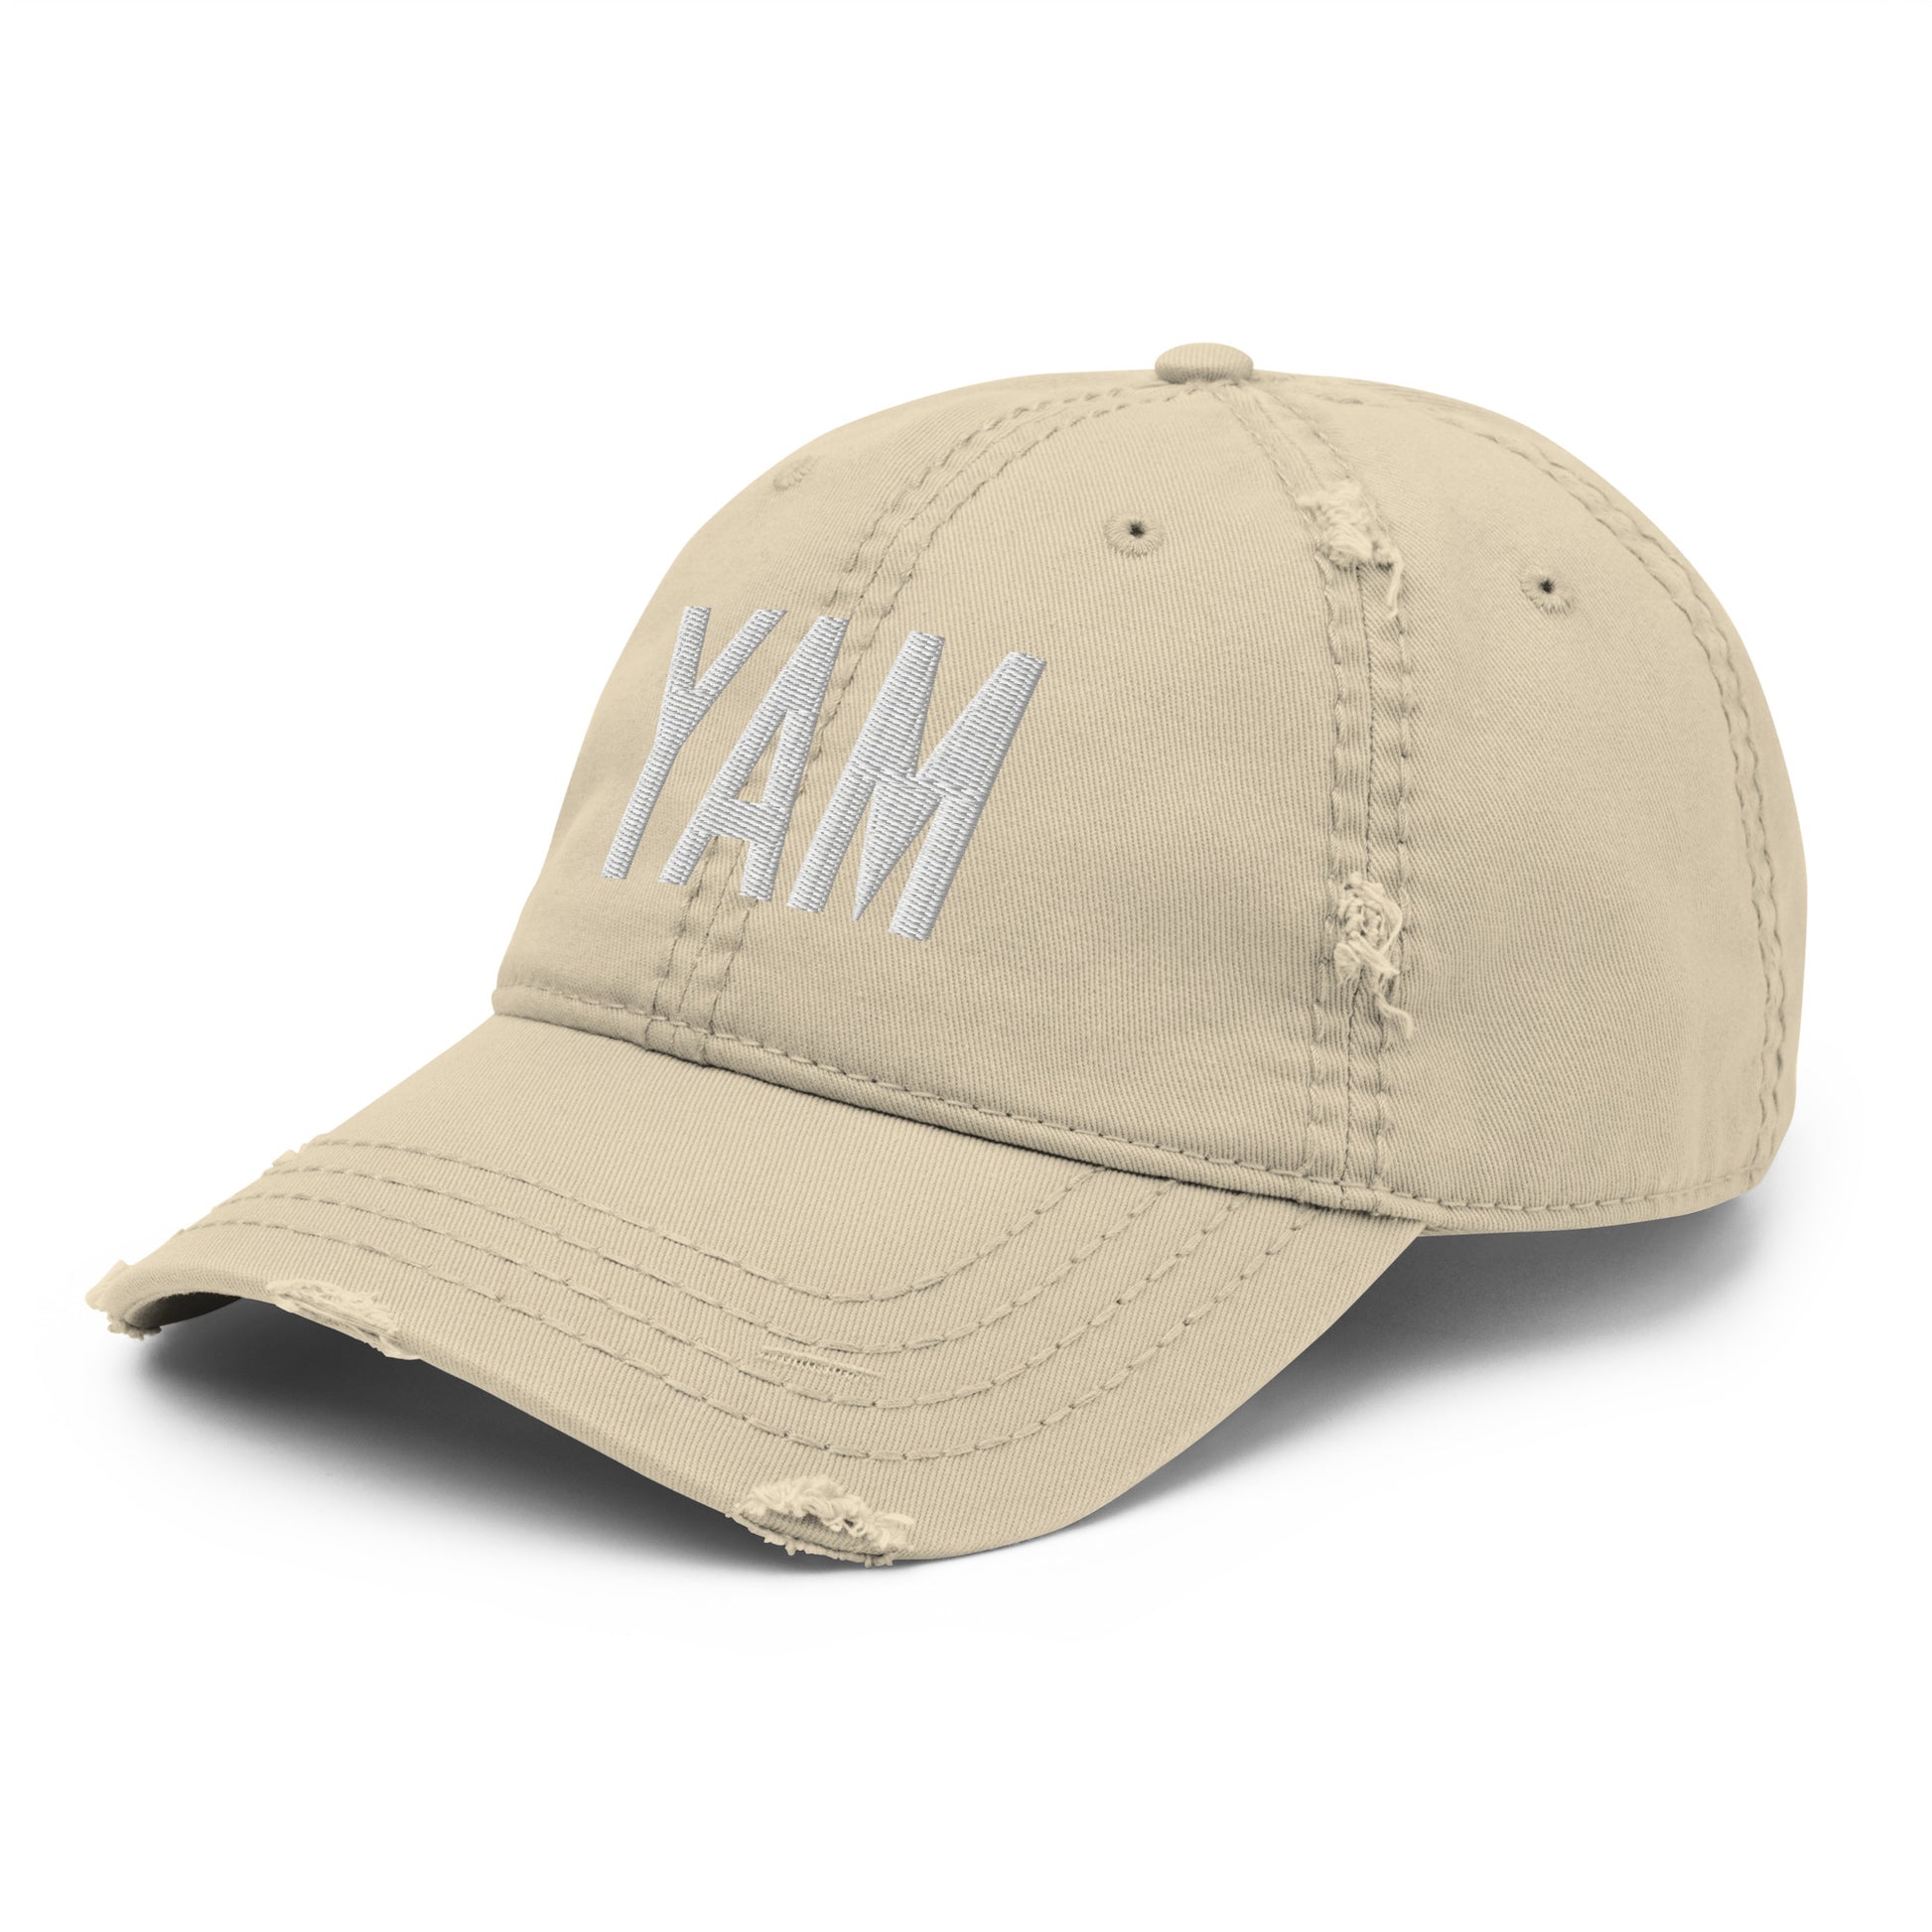 Airport Code Distressed Hat - White • YAM Sault-Ste-Marie • YHM Designs - Image 19